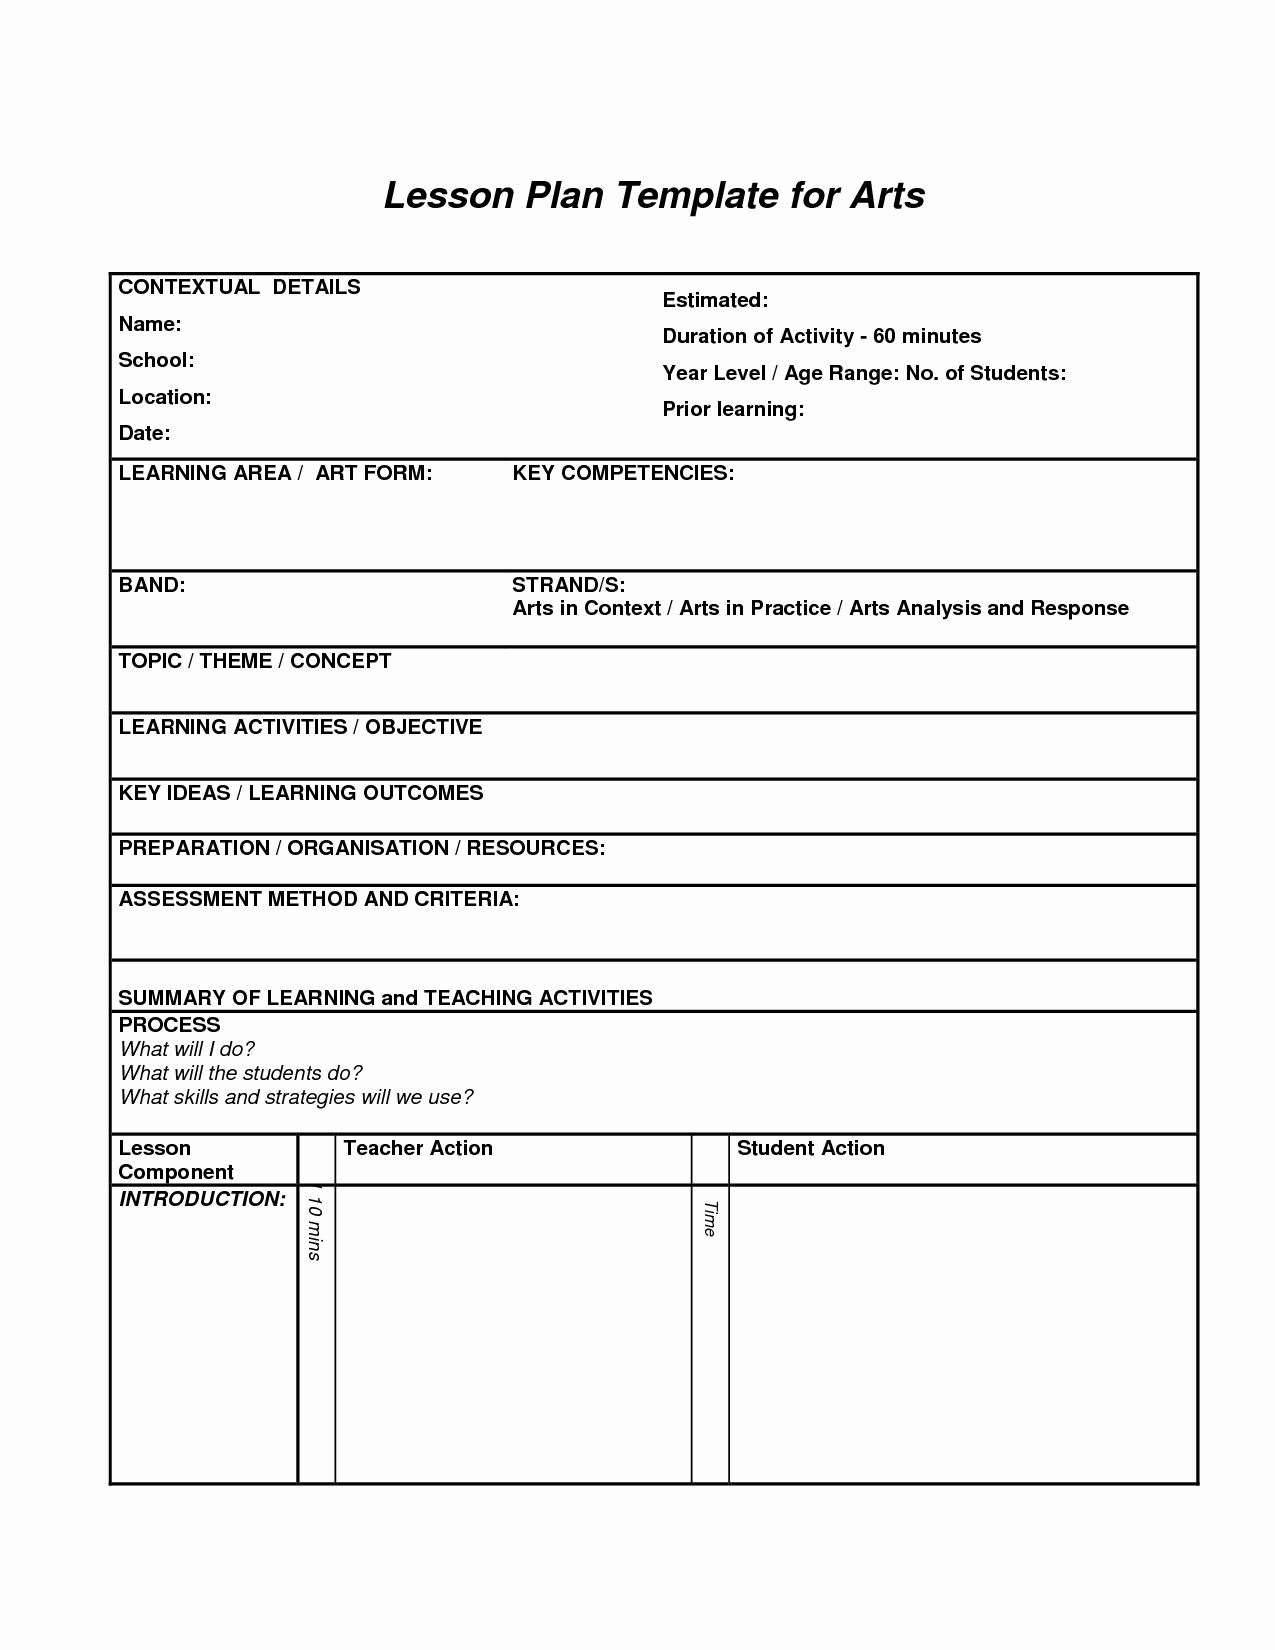 Tutoring Lesson Plan Template Inspirational Lesson Plan Template for Arts